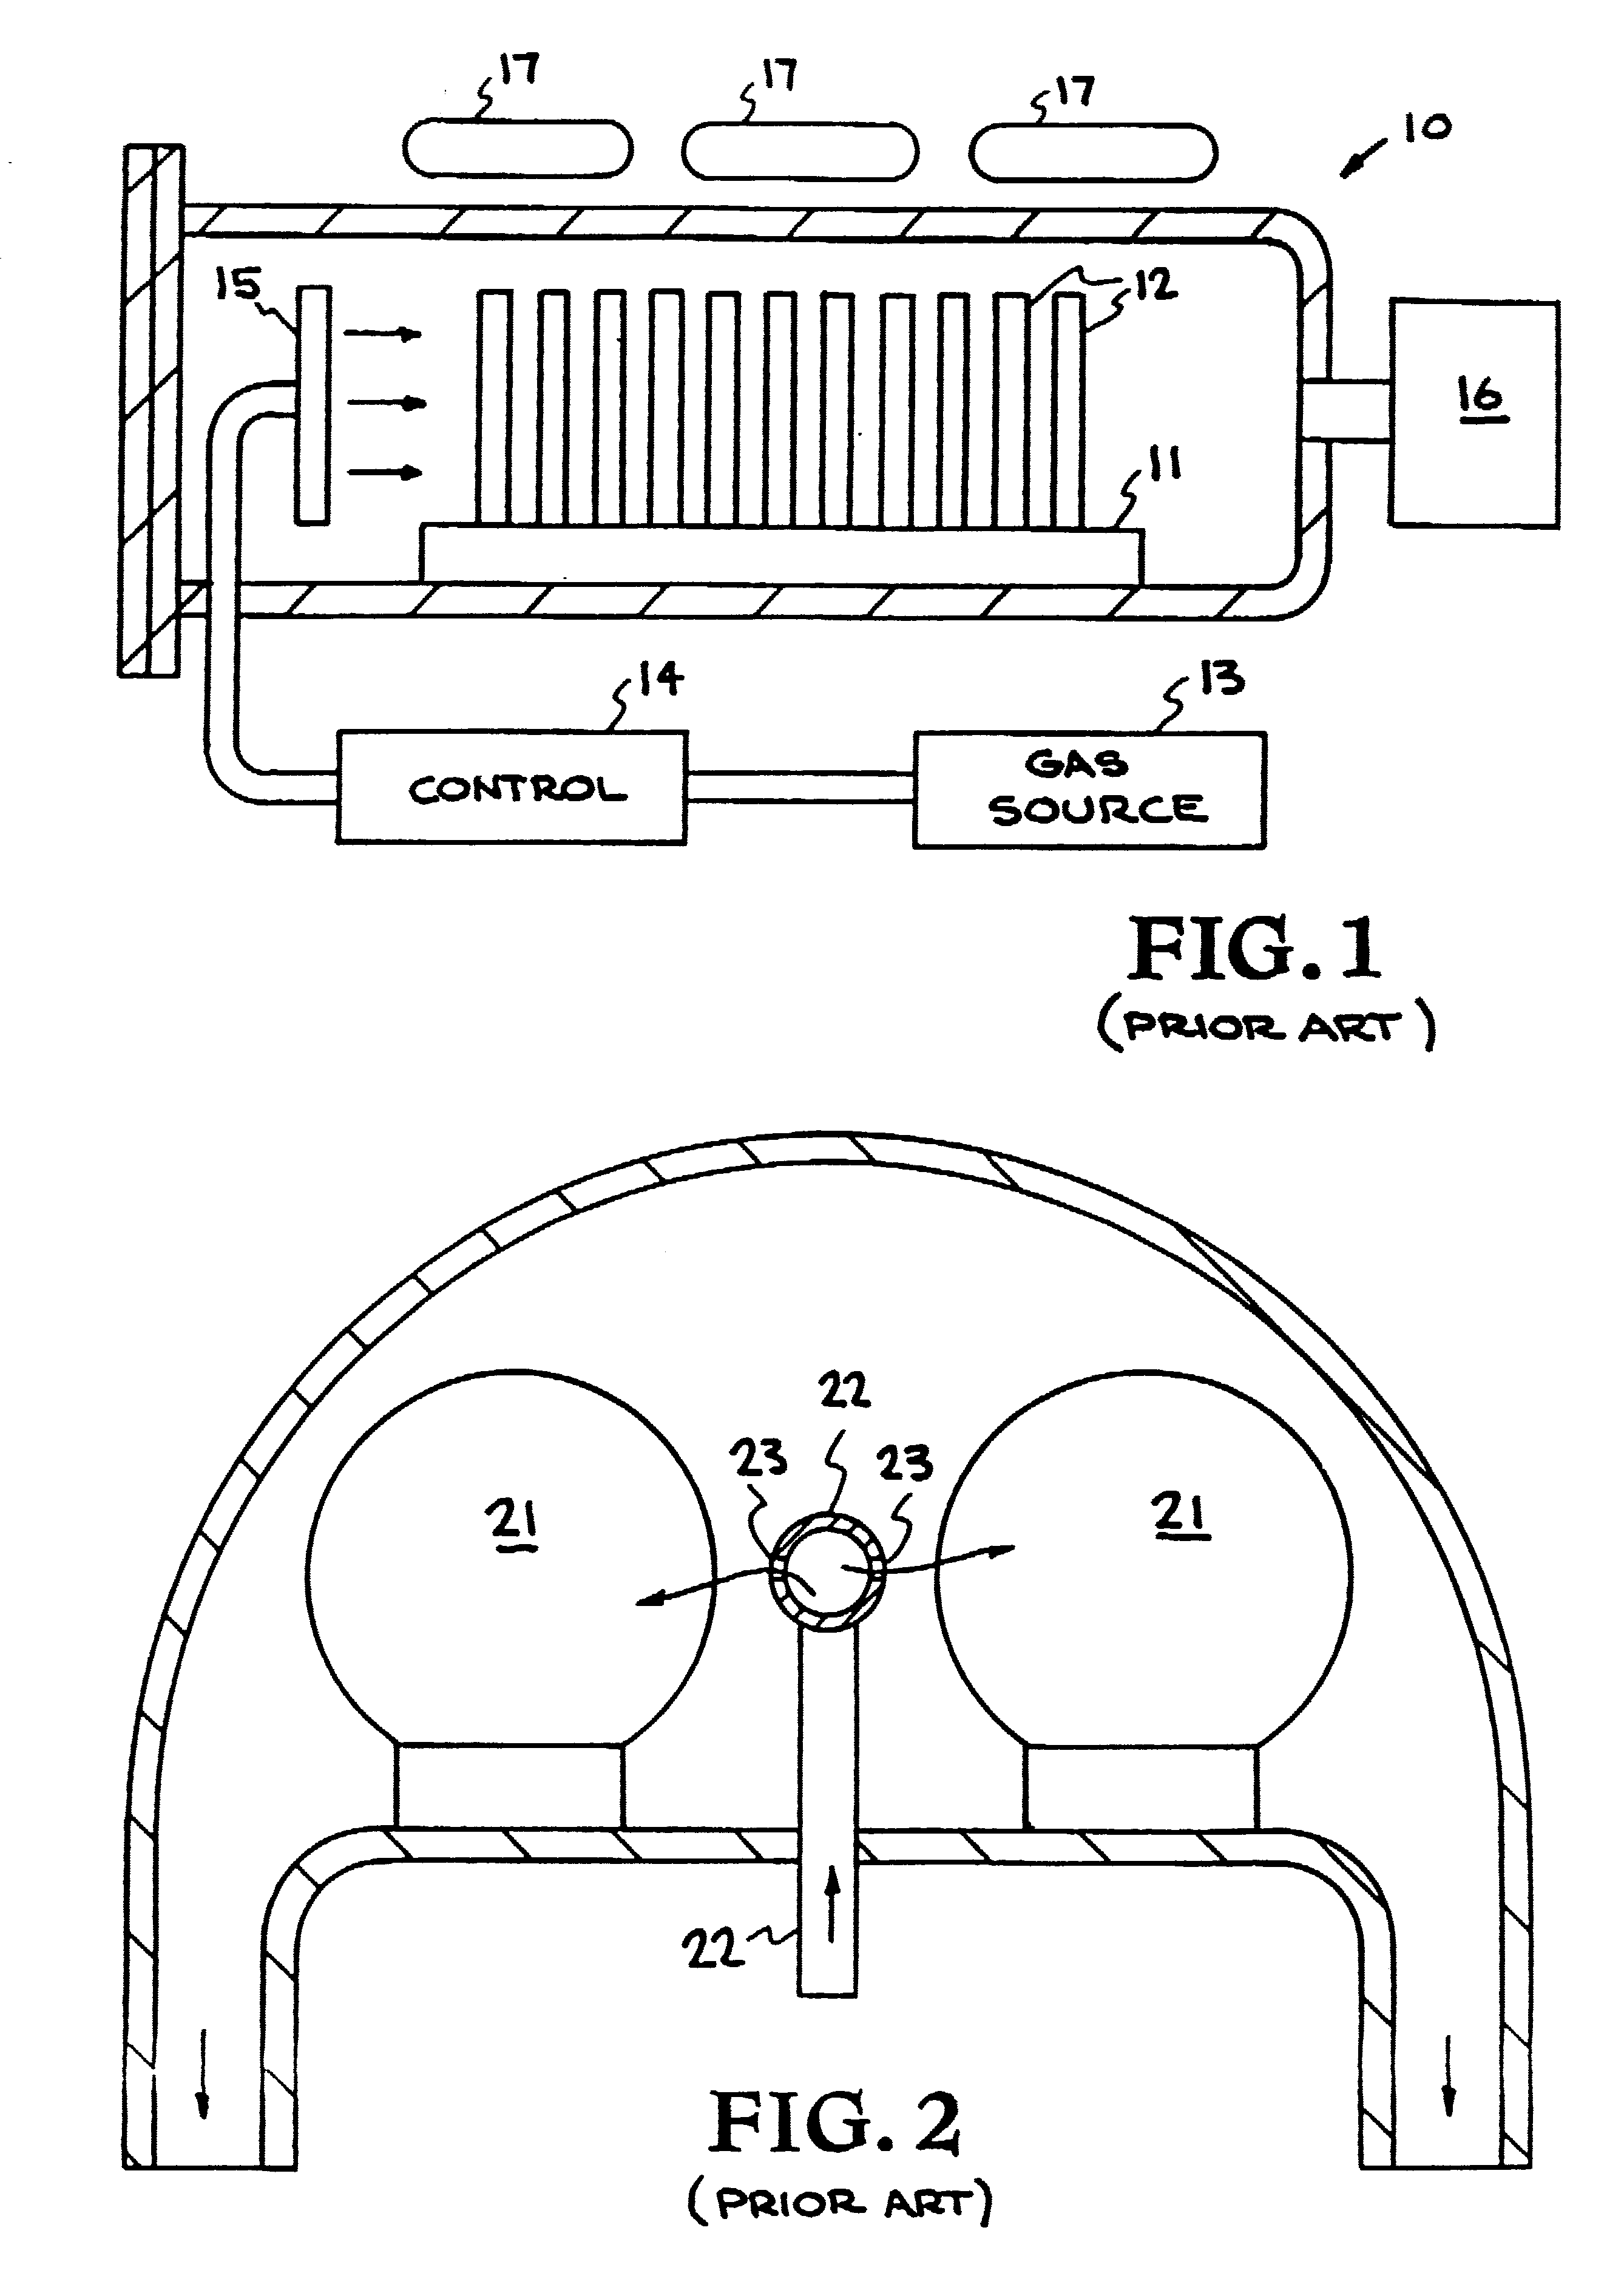 In situ method for cleaning silicon surface and forming layer thereon in same chamber